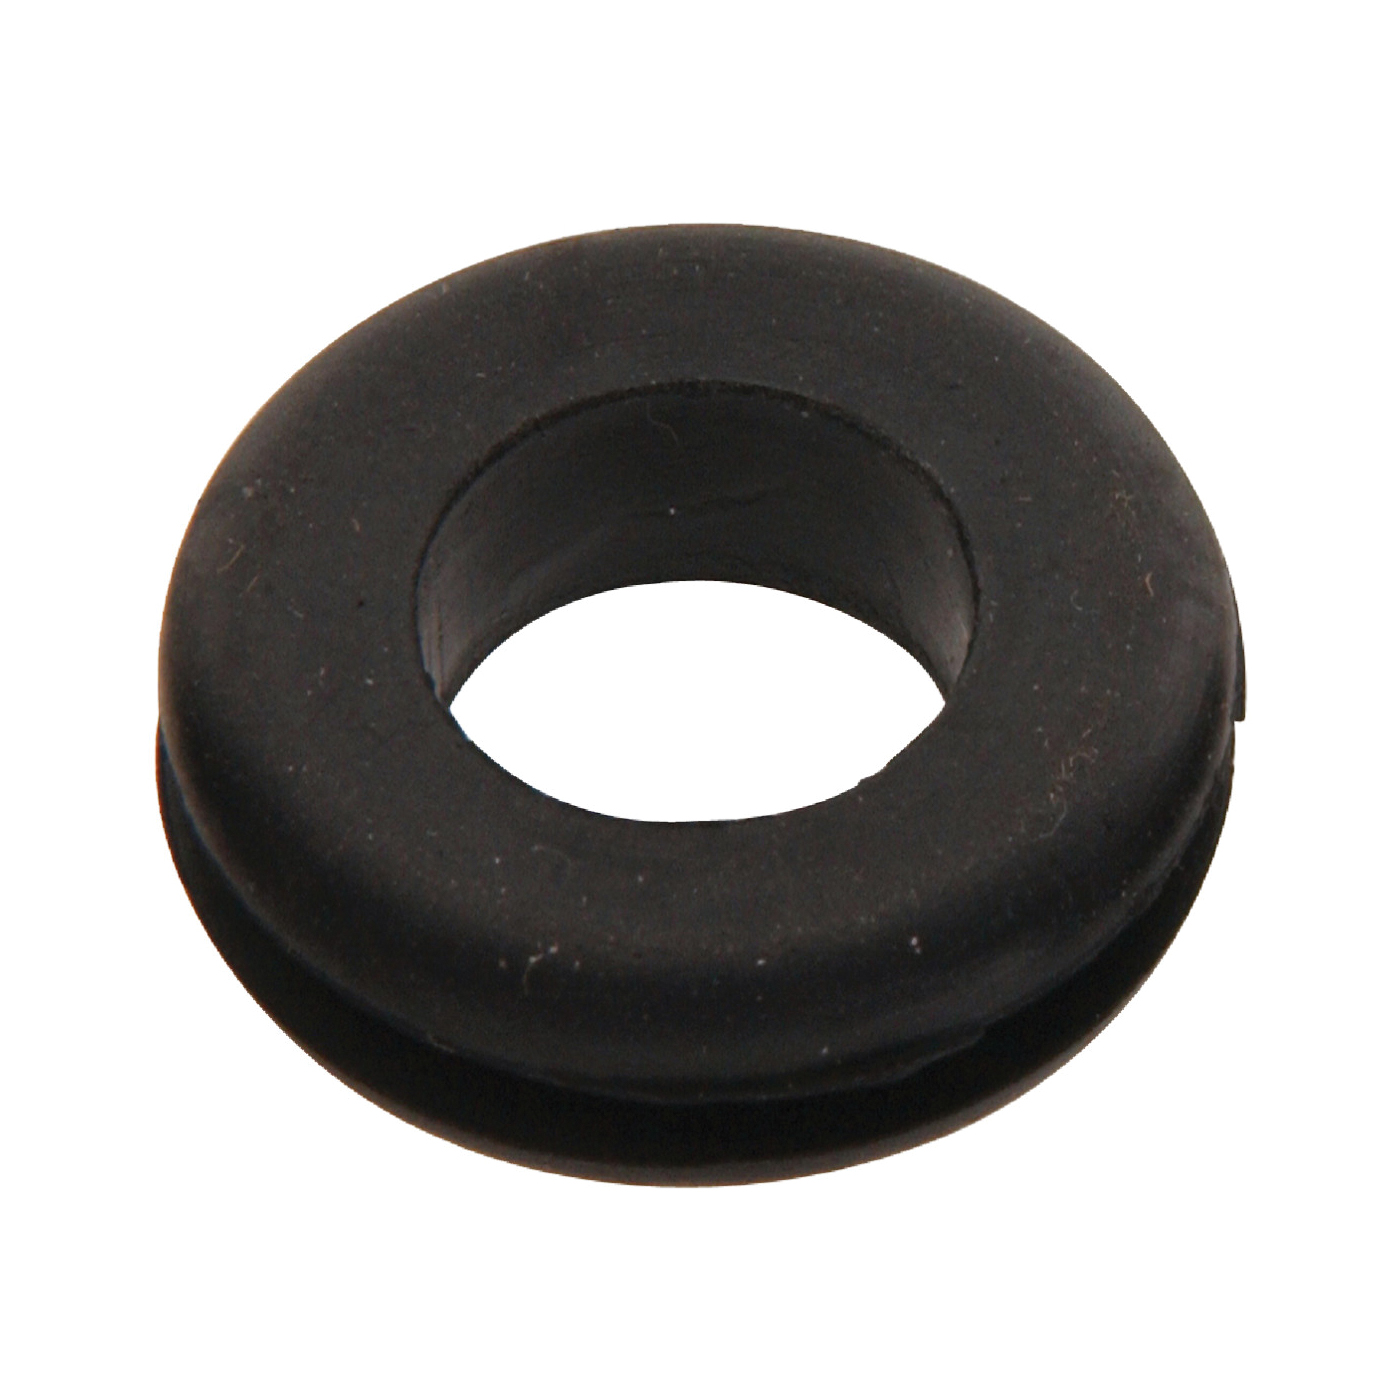 881256 Grommet, Rubber, 9/32 in Thick Panel